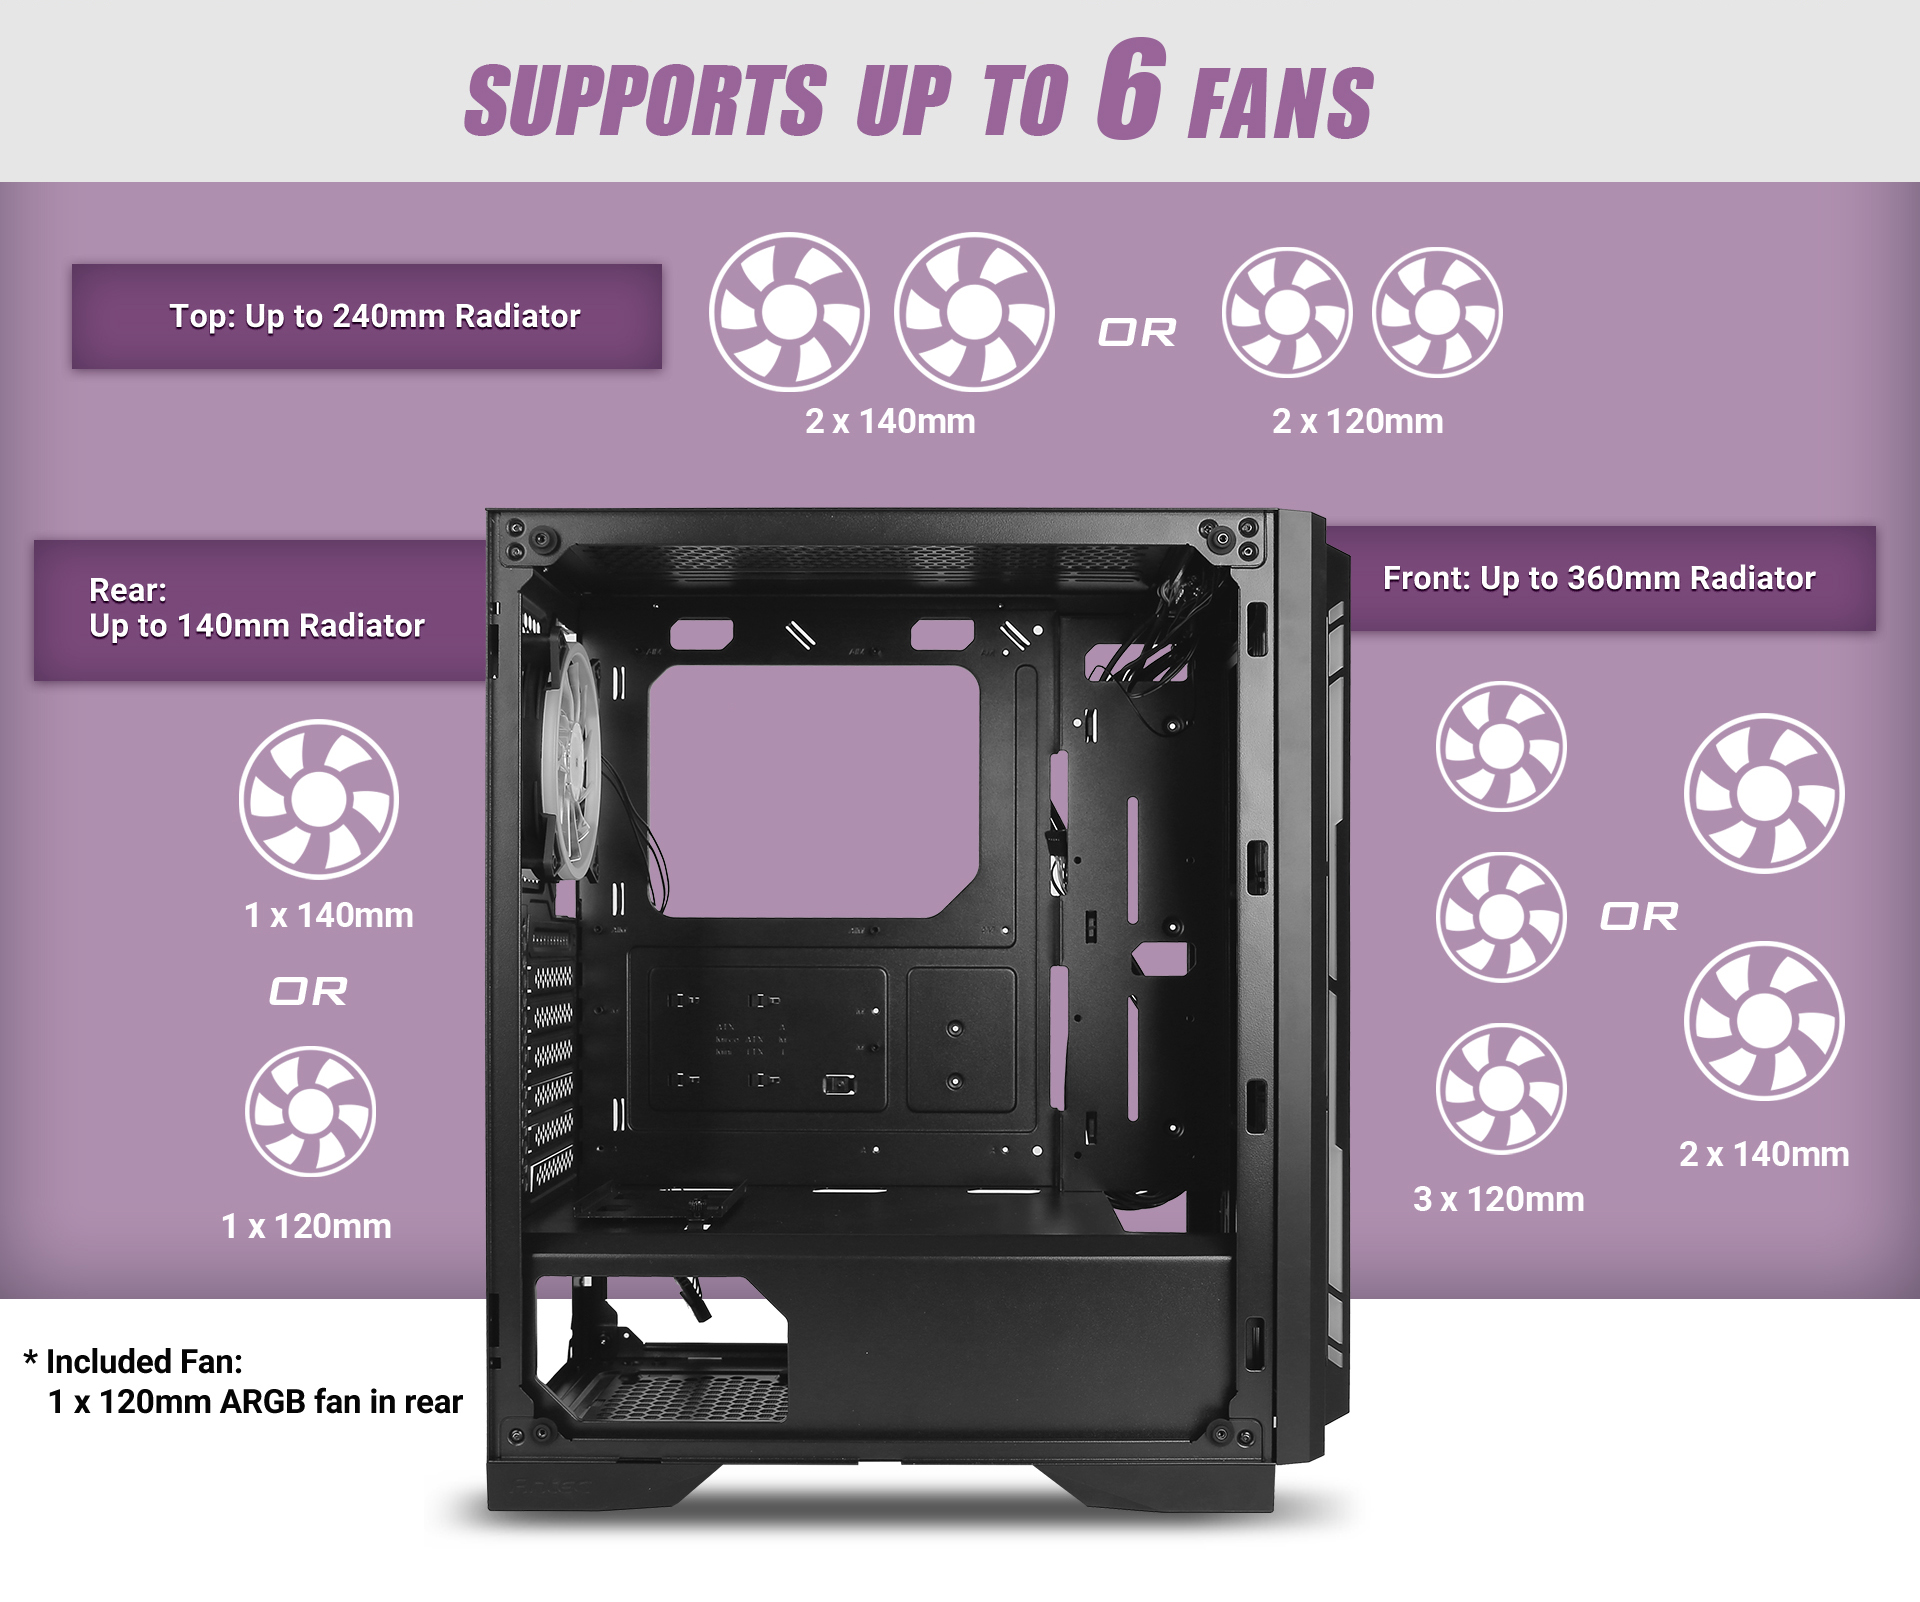 Antec NX Series NX400 supports 6 fan parameter